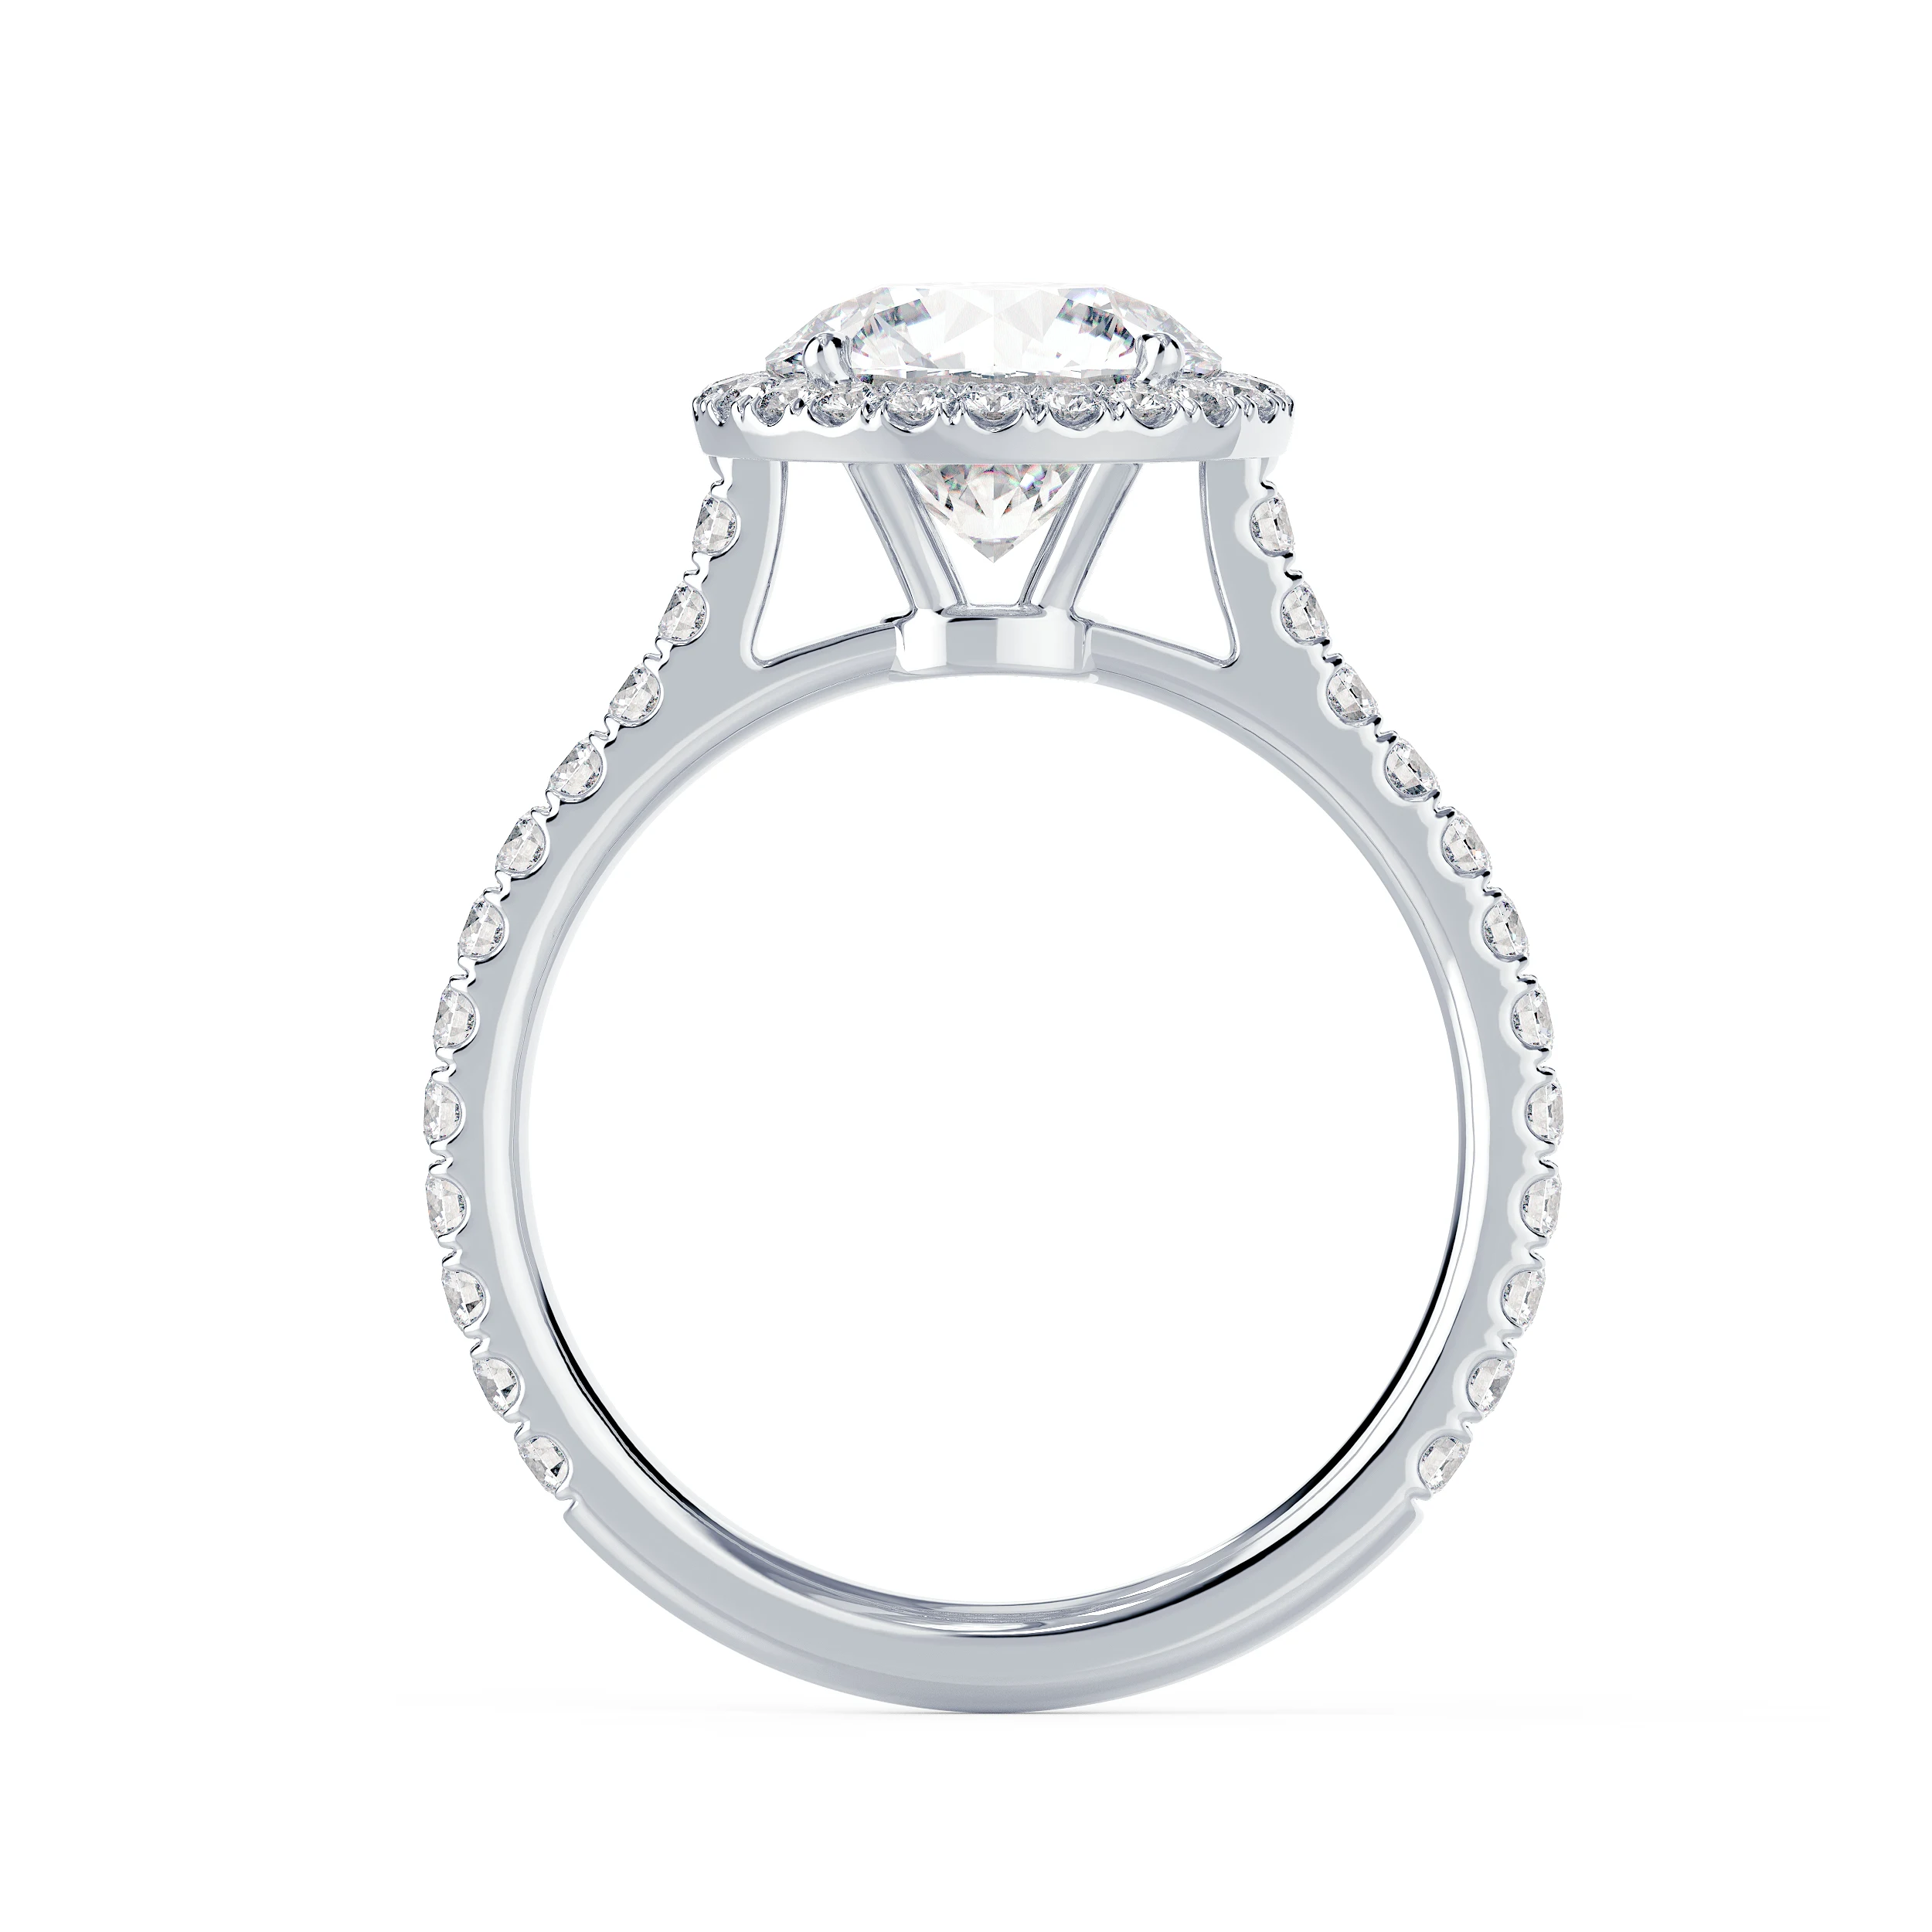 Exceptional Quality Lab Created Diamonds Round Halo Pavé Setting in White Gold (Profile View)